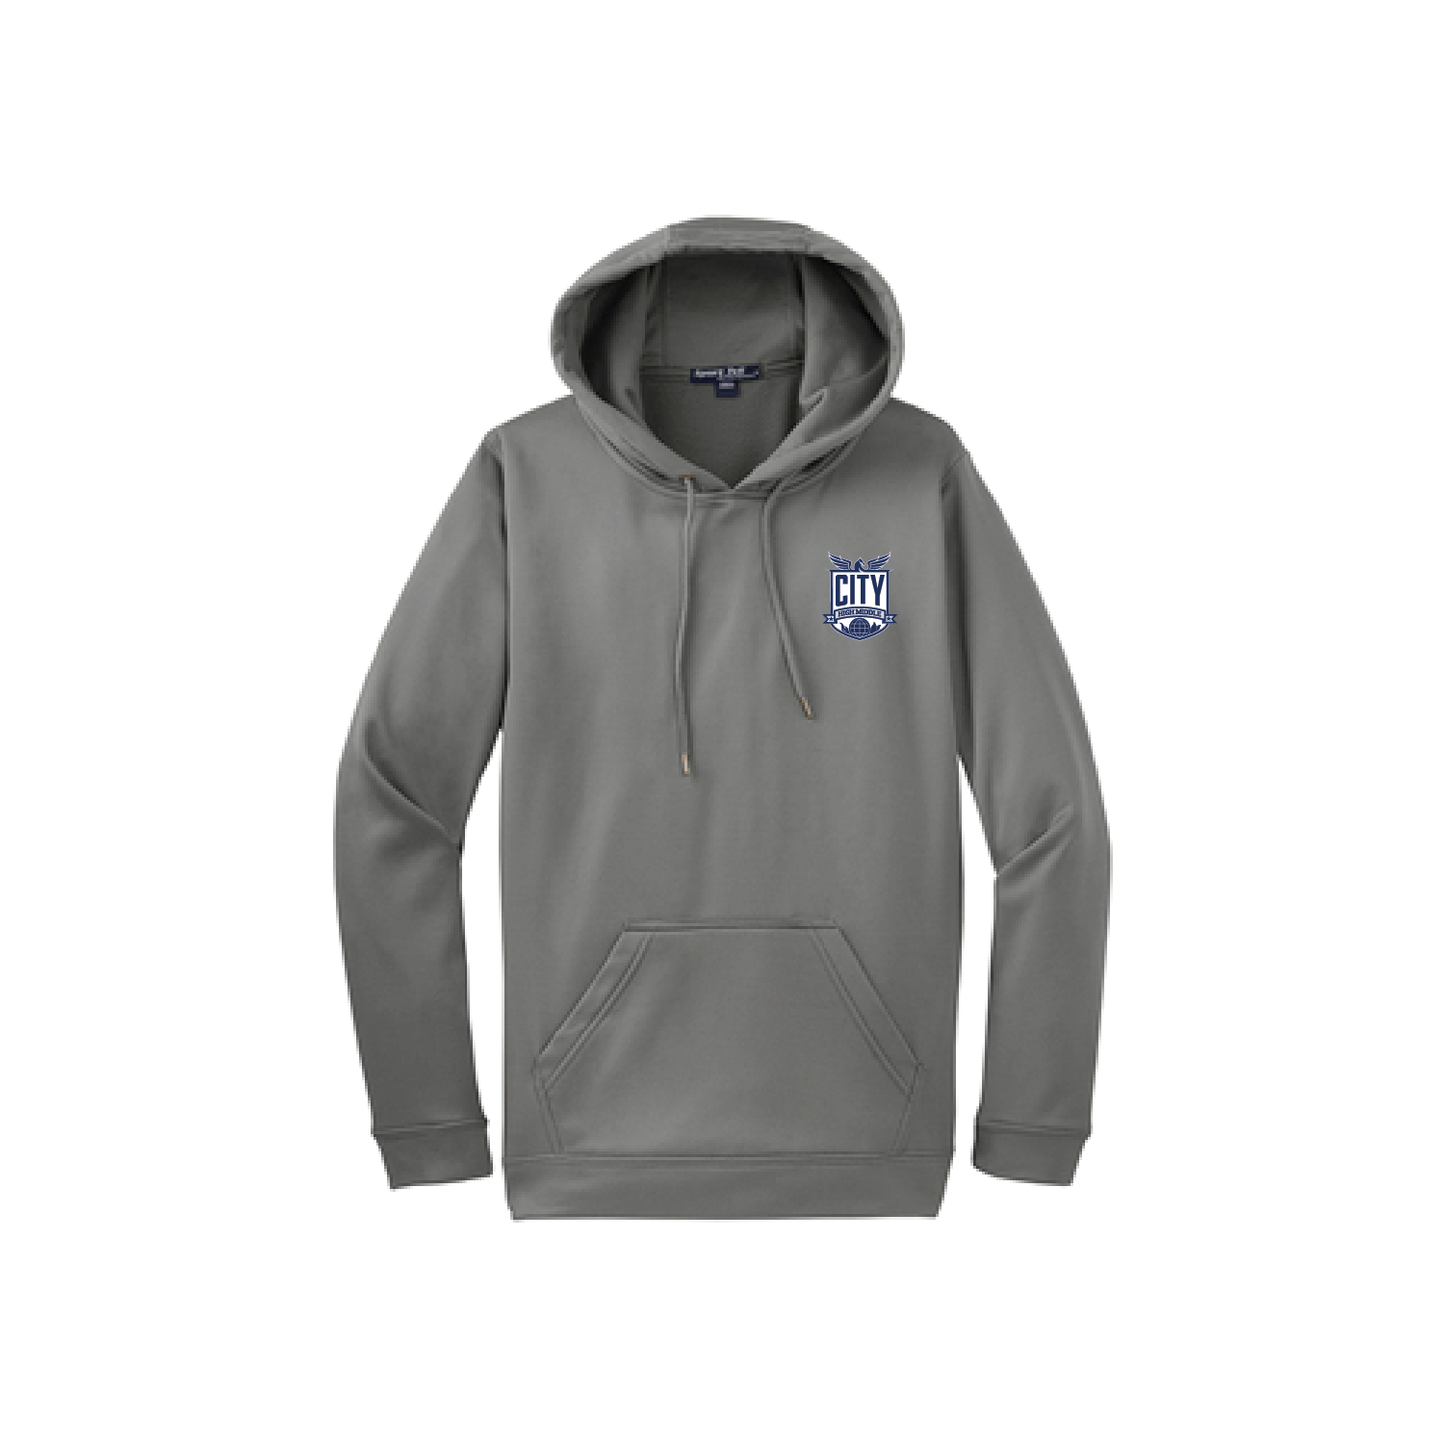 City High Middle Unisex Pull Over Hoodie (F244)